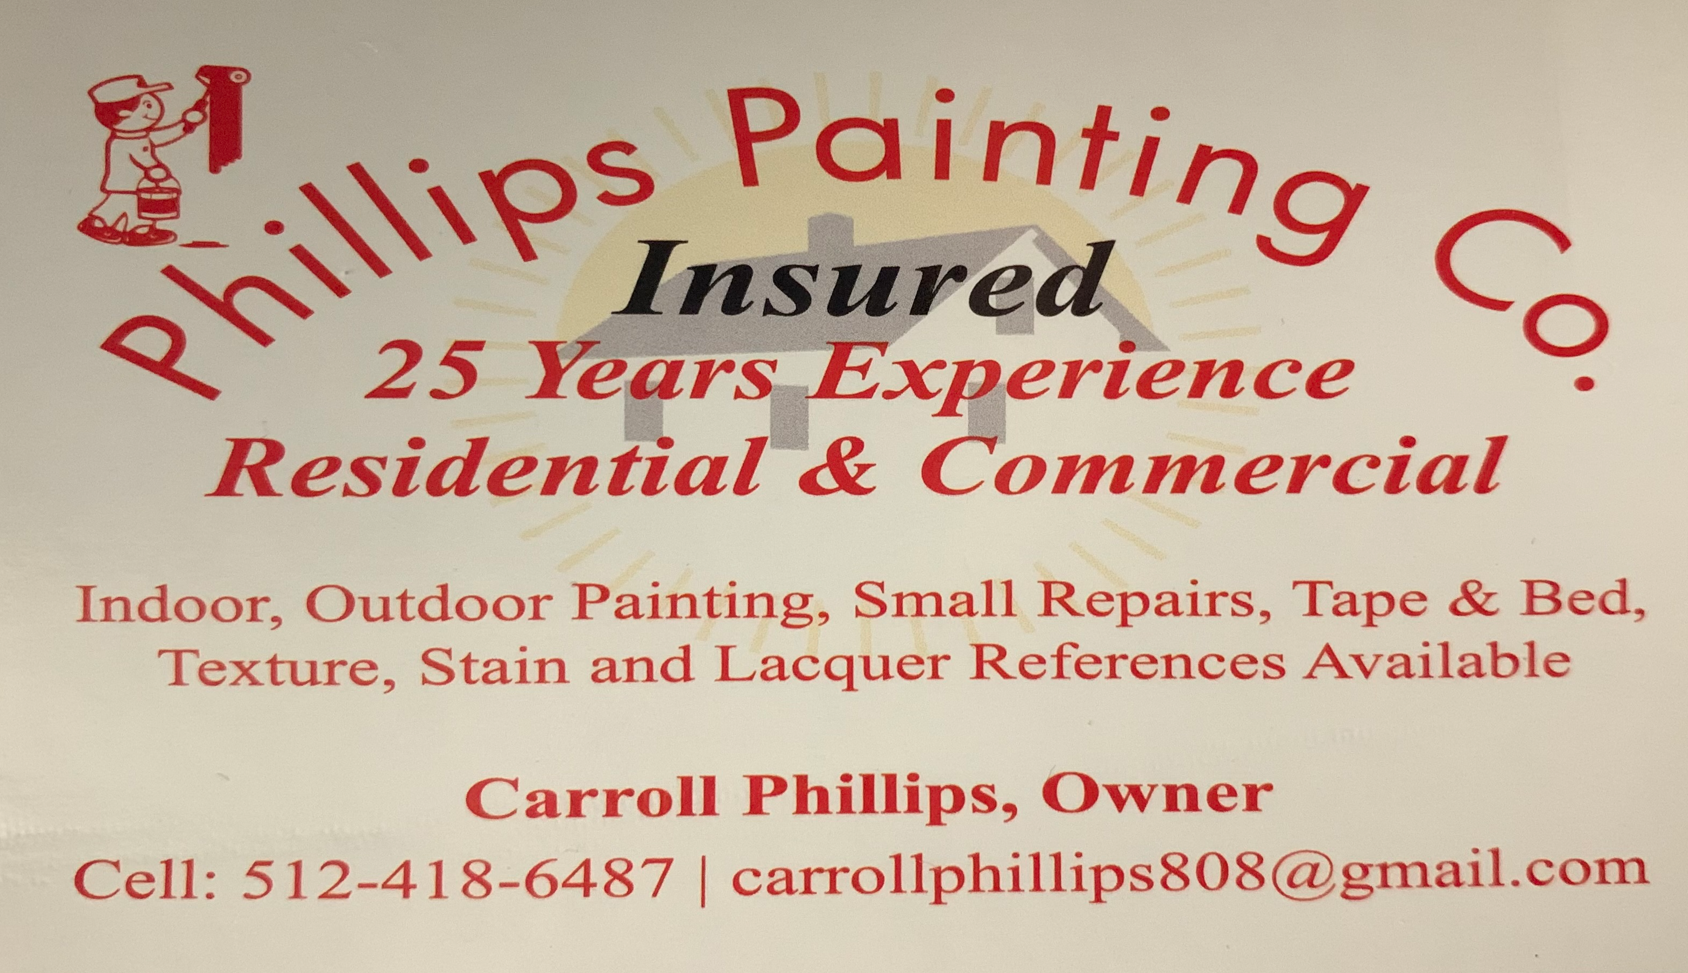 Phillips Painting Co